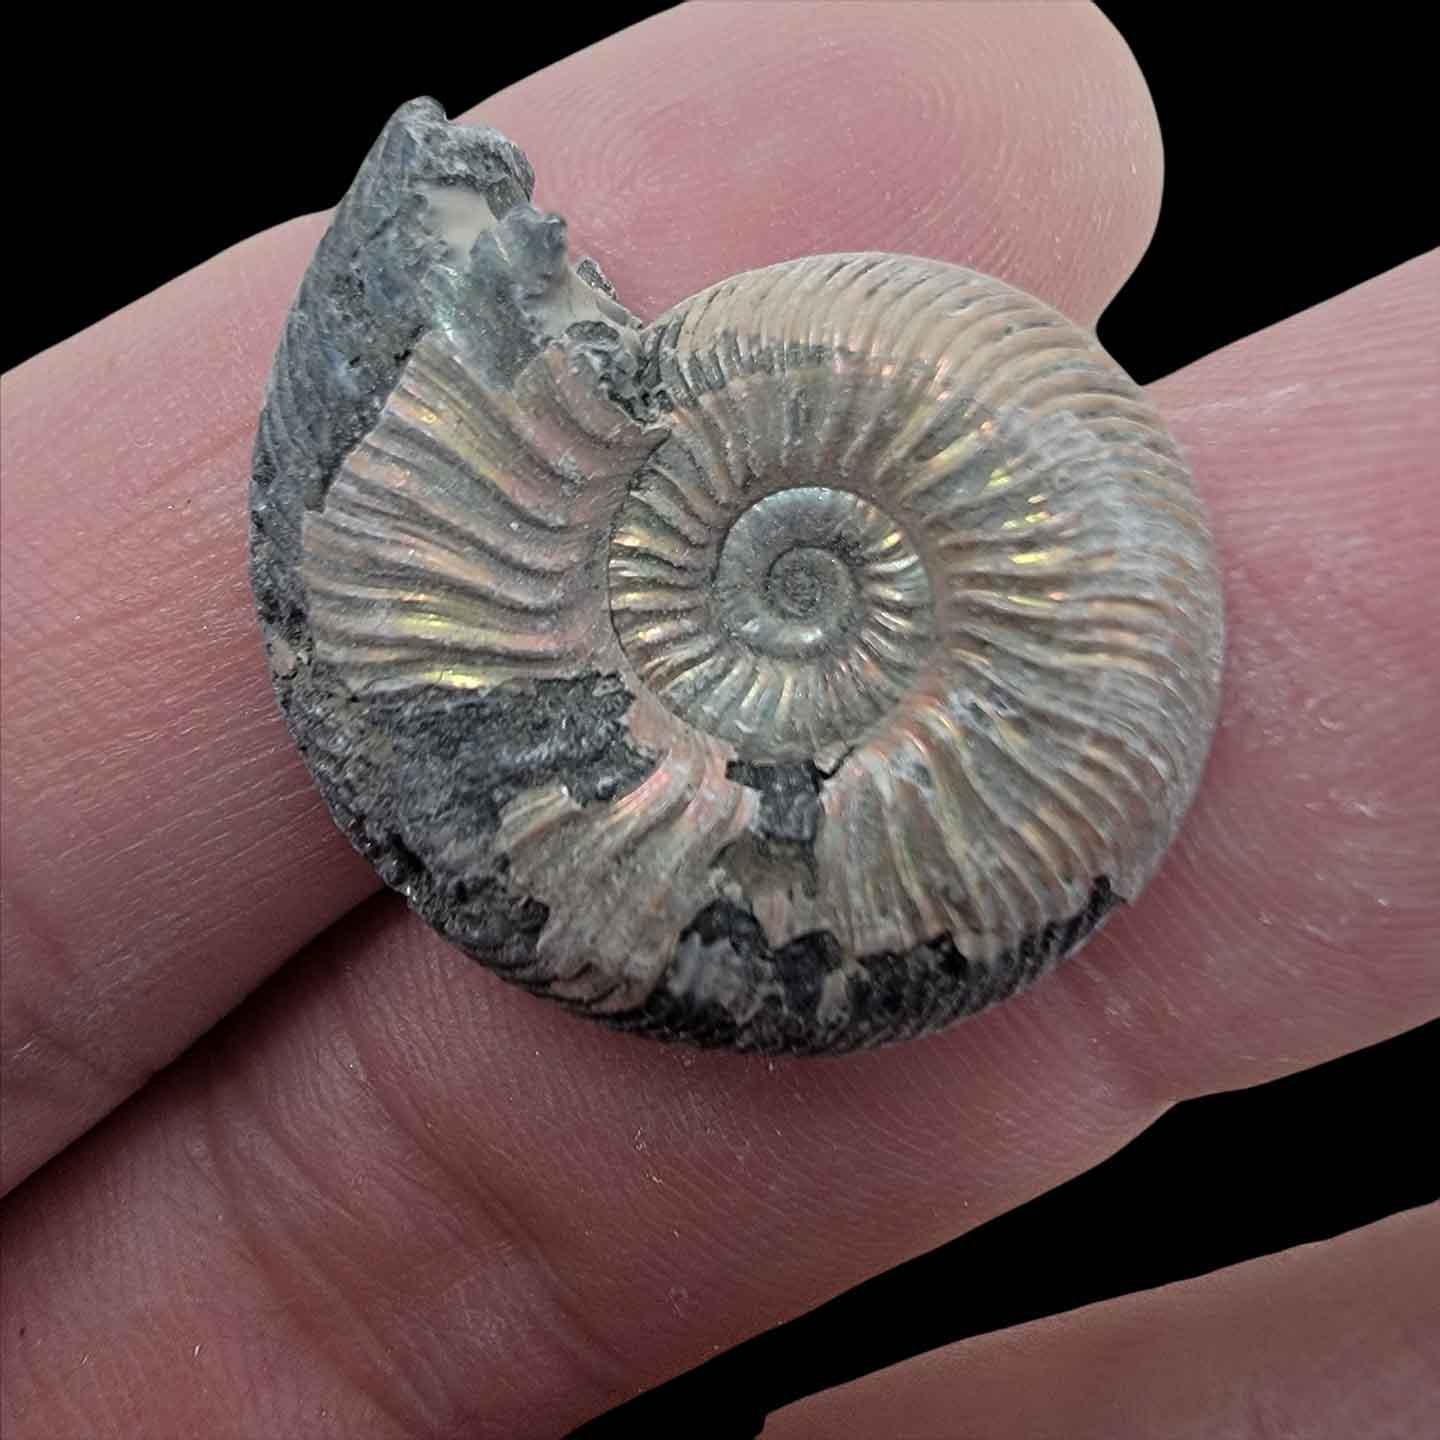 Pyritized Ammonite Fossil!  Jurassic Period Fossil! - LapidaryCentral